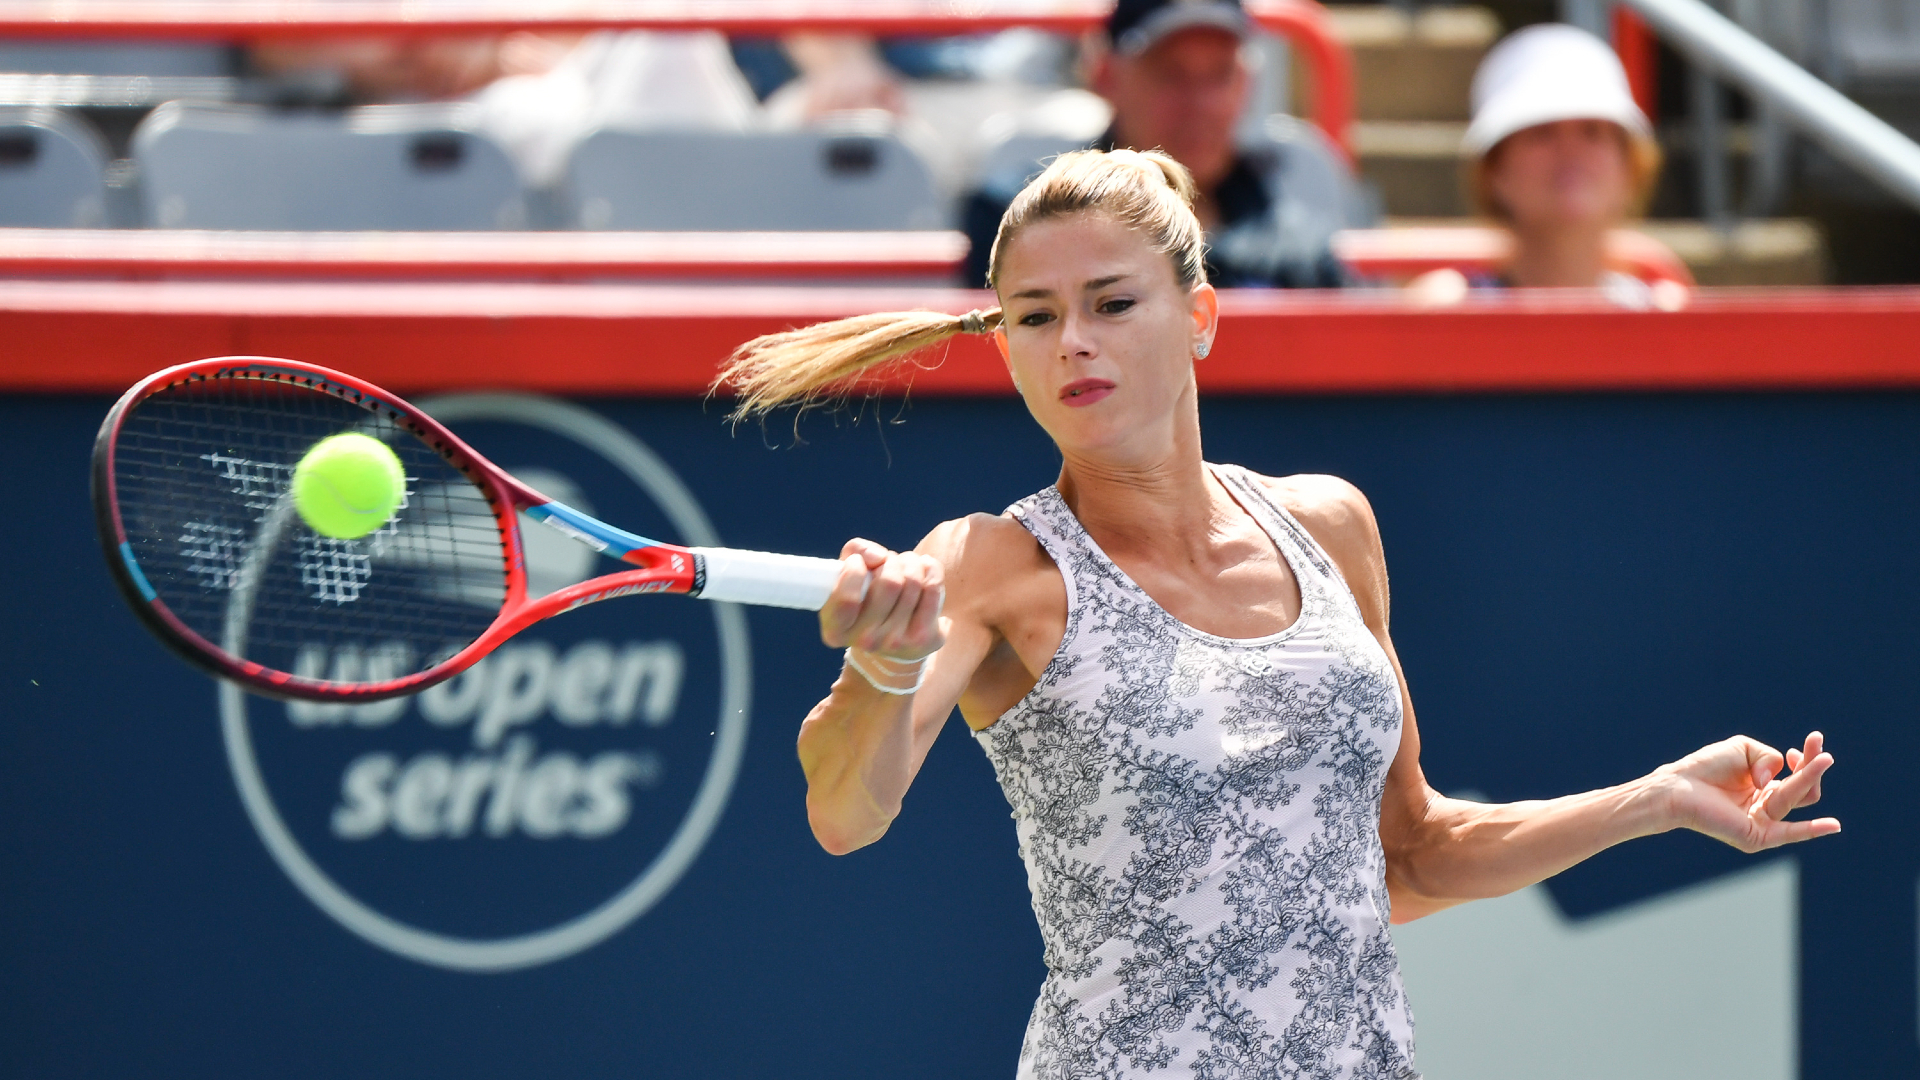 Following wins over Karolina Pliskova in Eastbourne and Tokyo this year, Camila Giorgi again prevailed in the National Bank Open final.